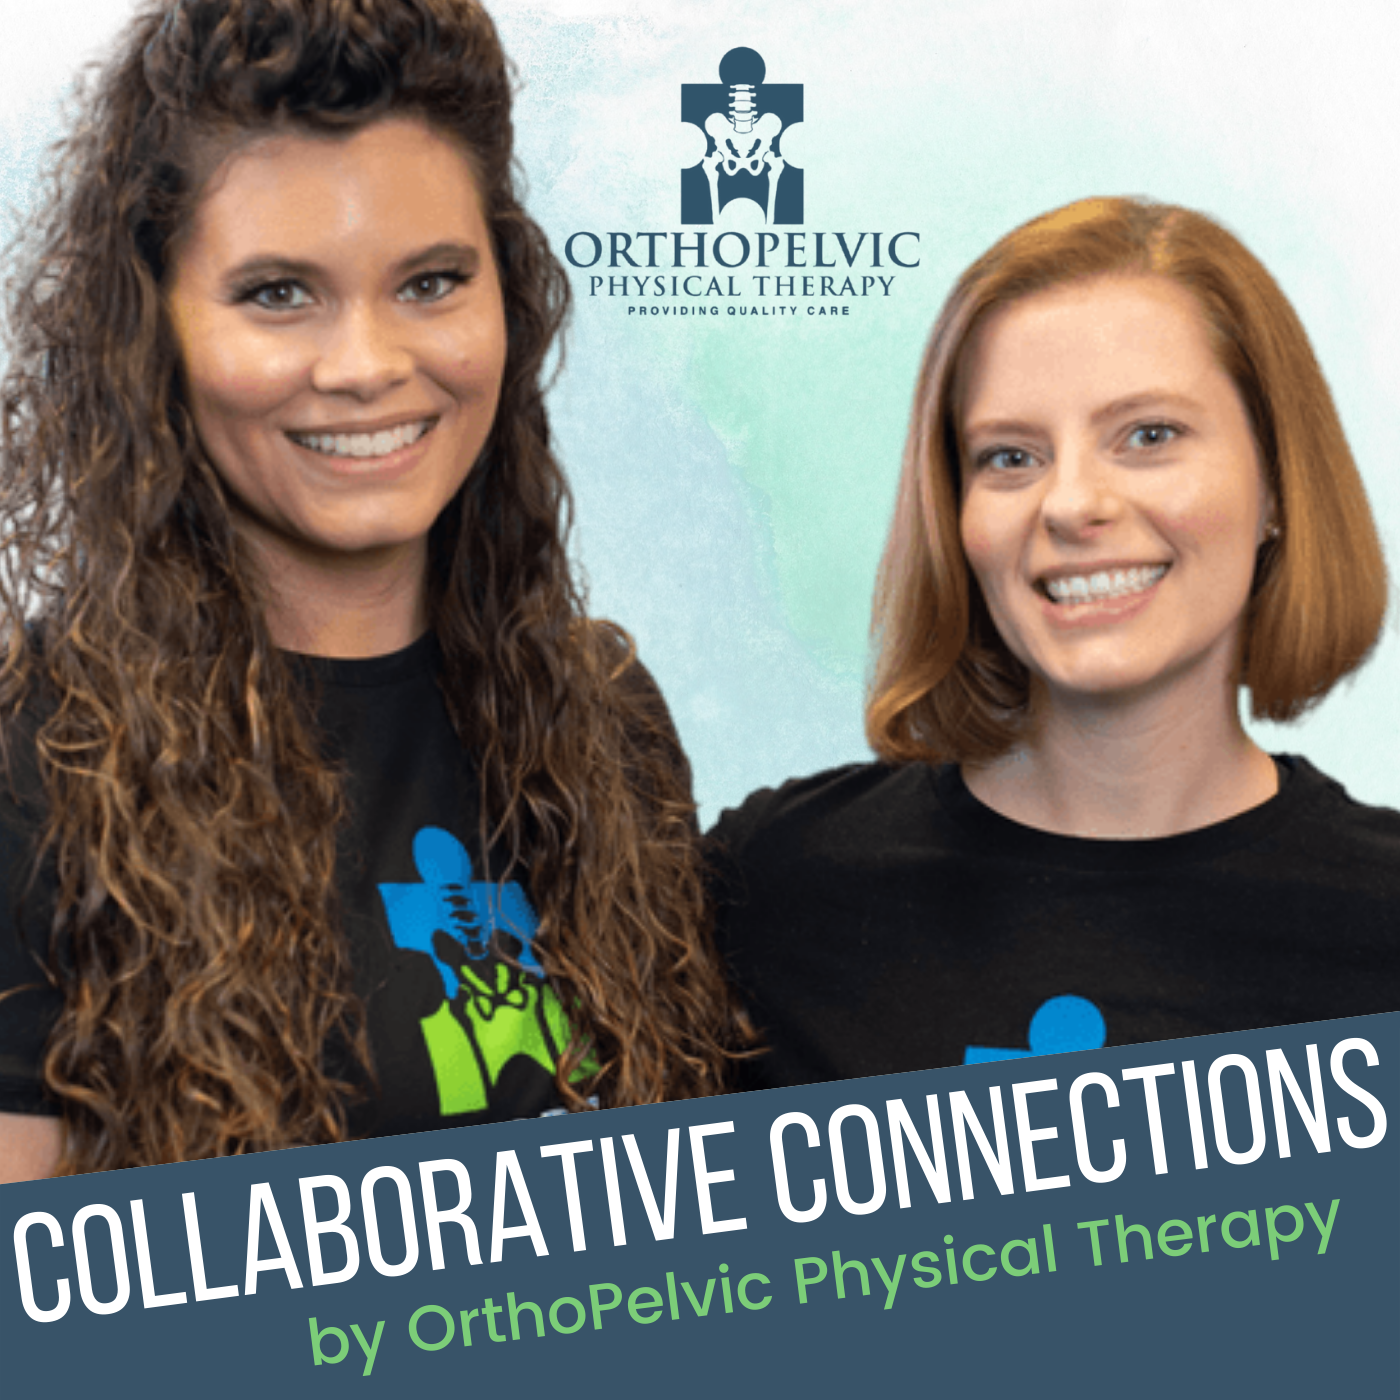 Artwork for Collaborative Connections by OrthoPelvic Physical Therapy